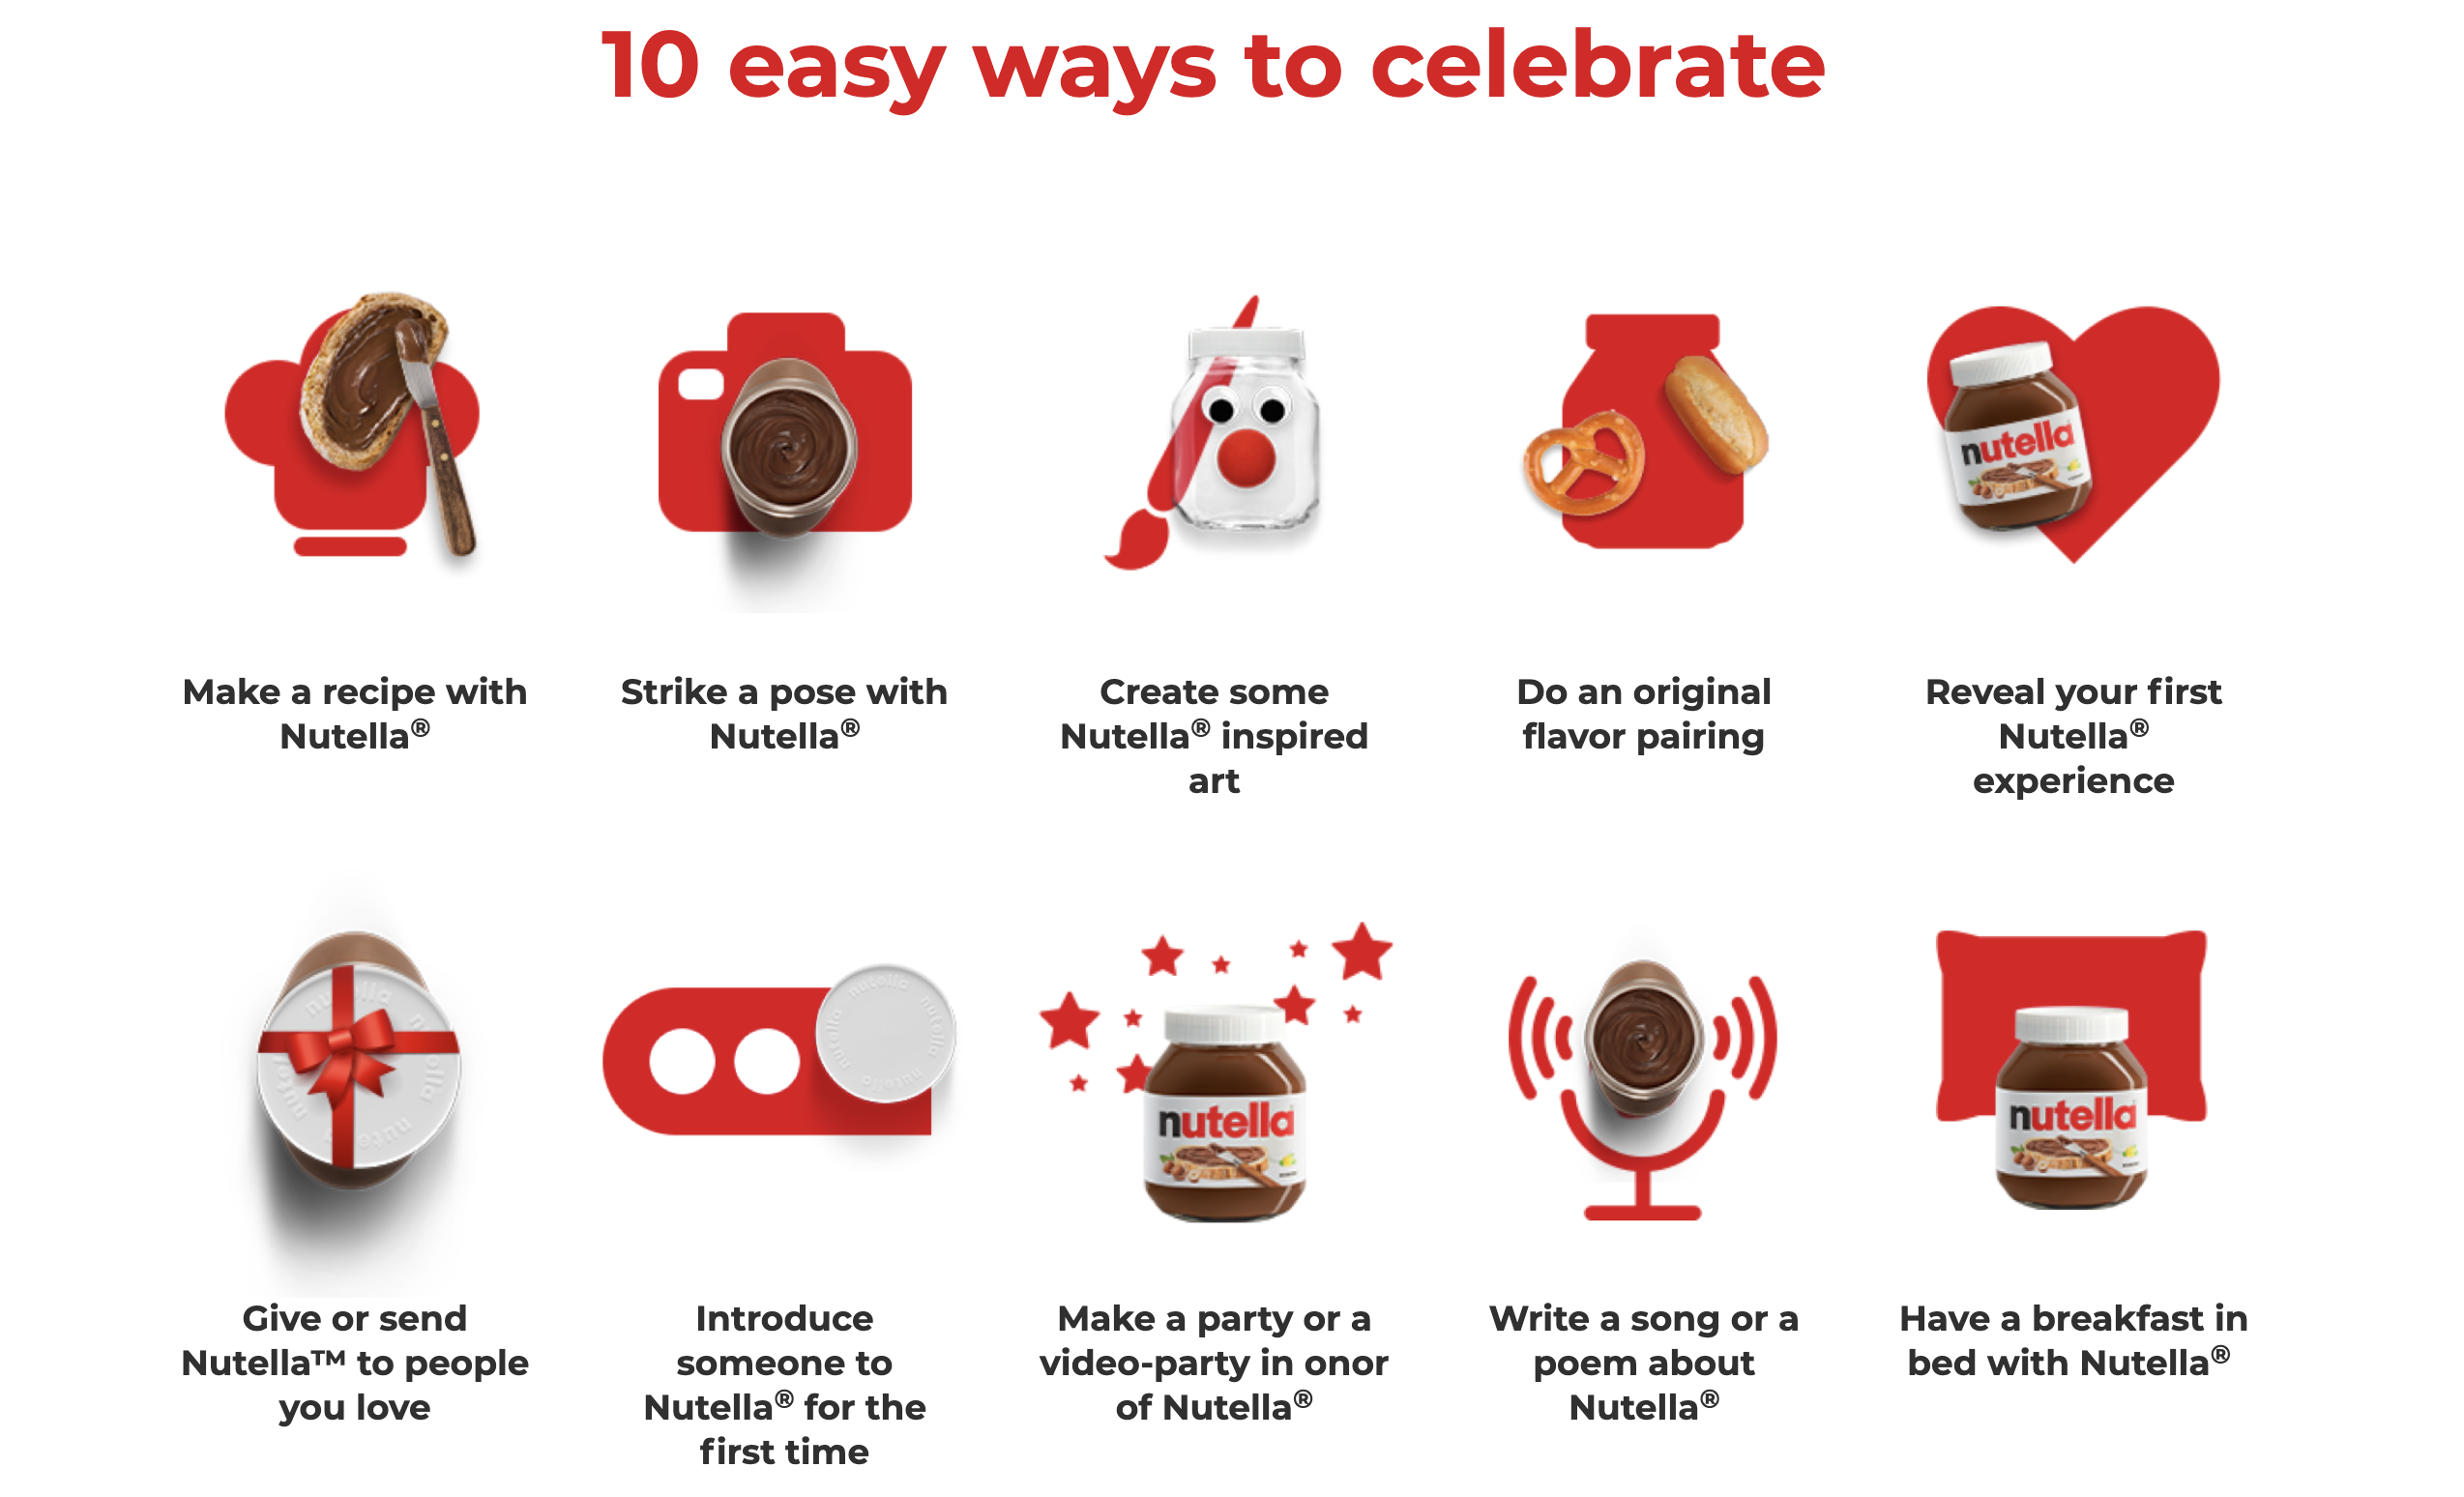 Looking_for_a_Reason_to_Eat_That_Nutella_Jar_Here_It_Is_World_Nutella_Day_10_Ways_to_Celebrate.png